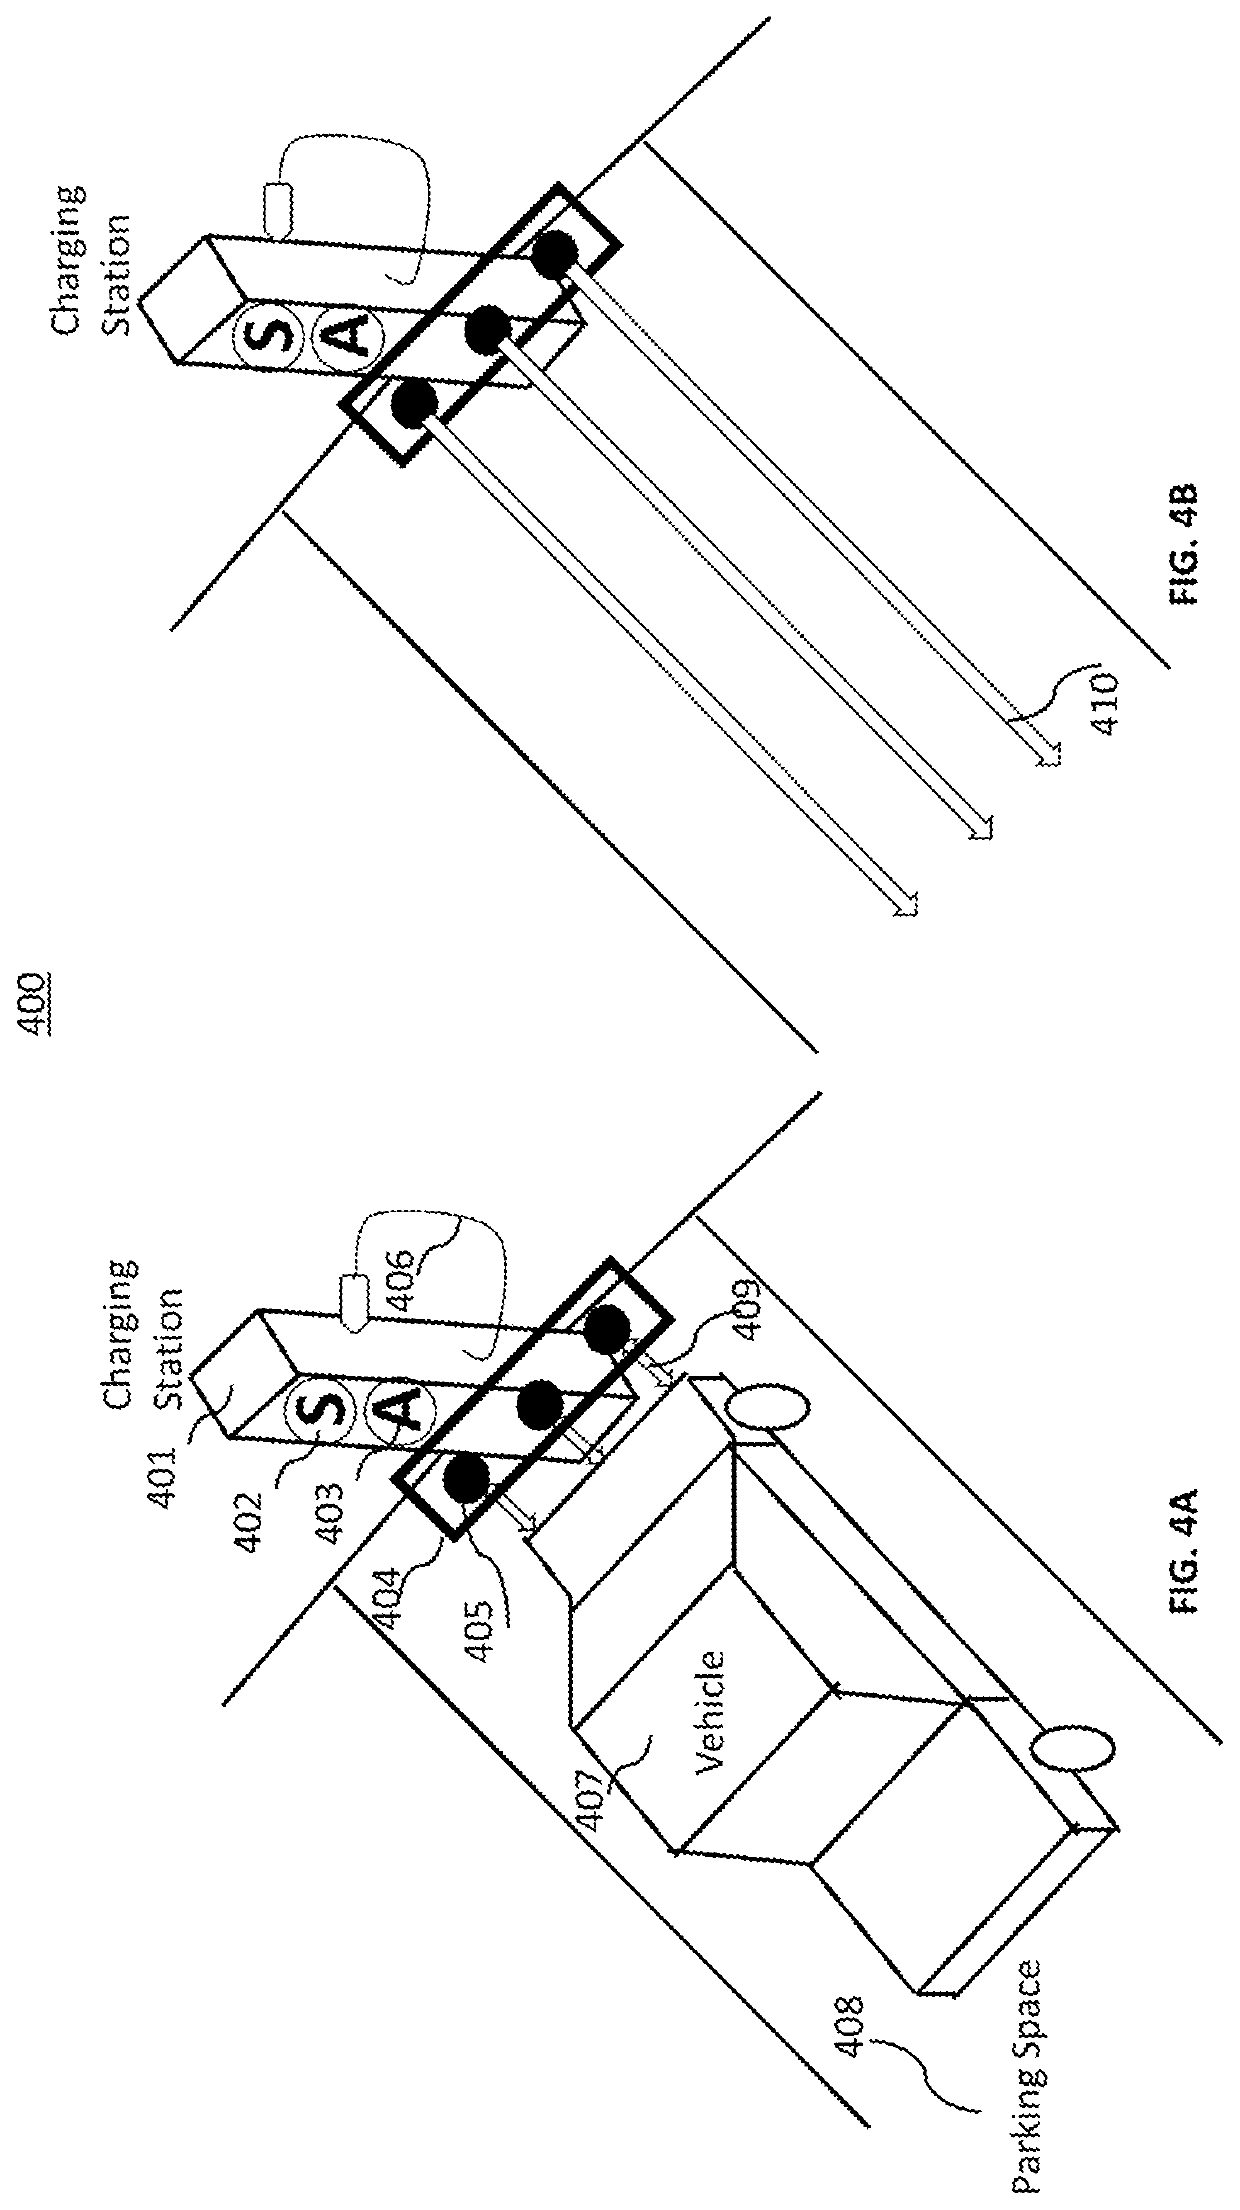 Method and apparatus to manage electric vehicle charging stations and parking spaces